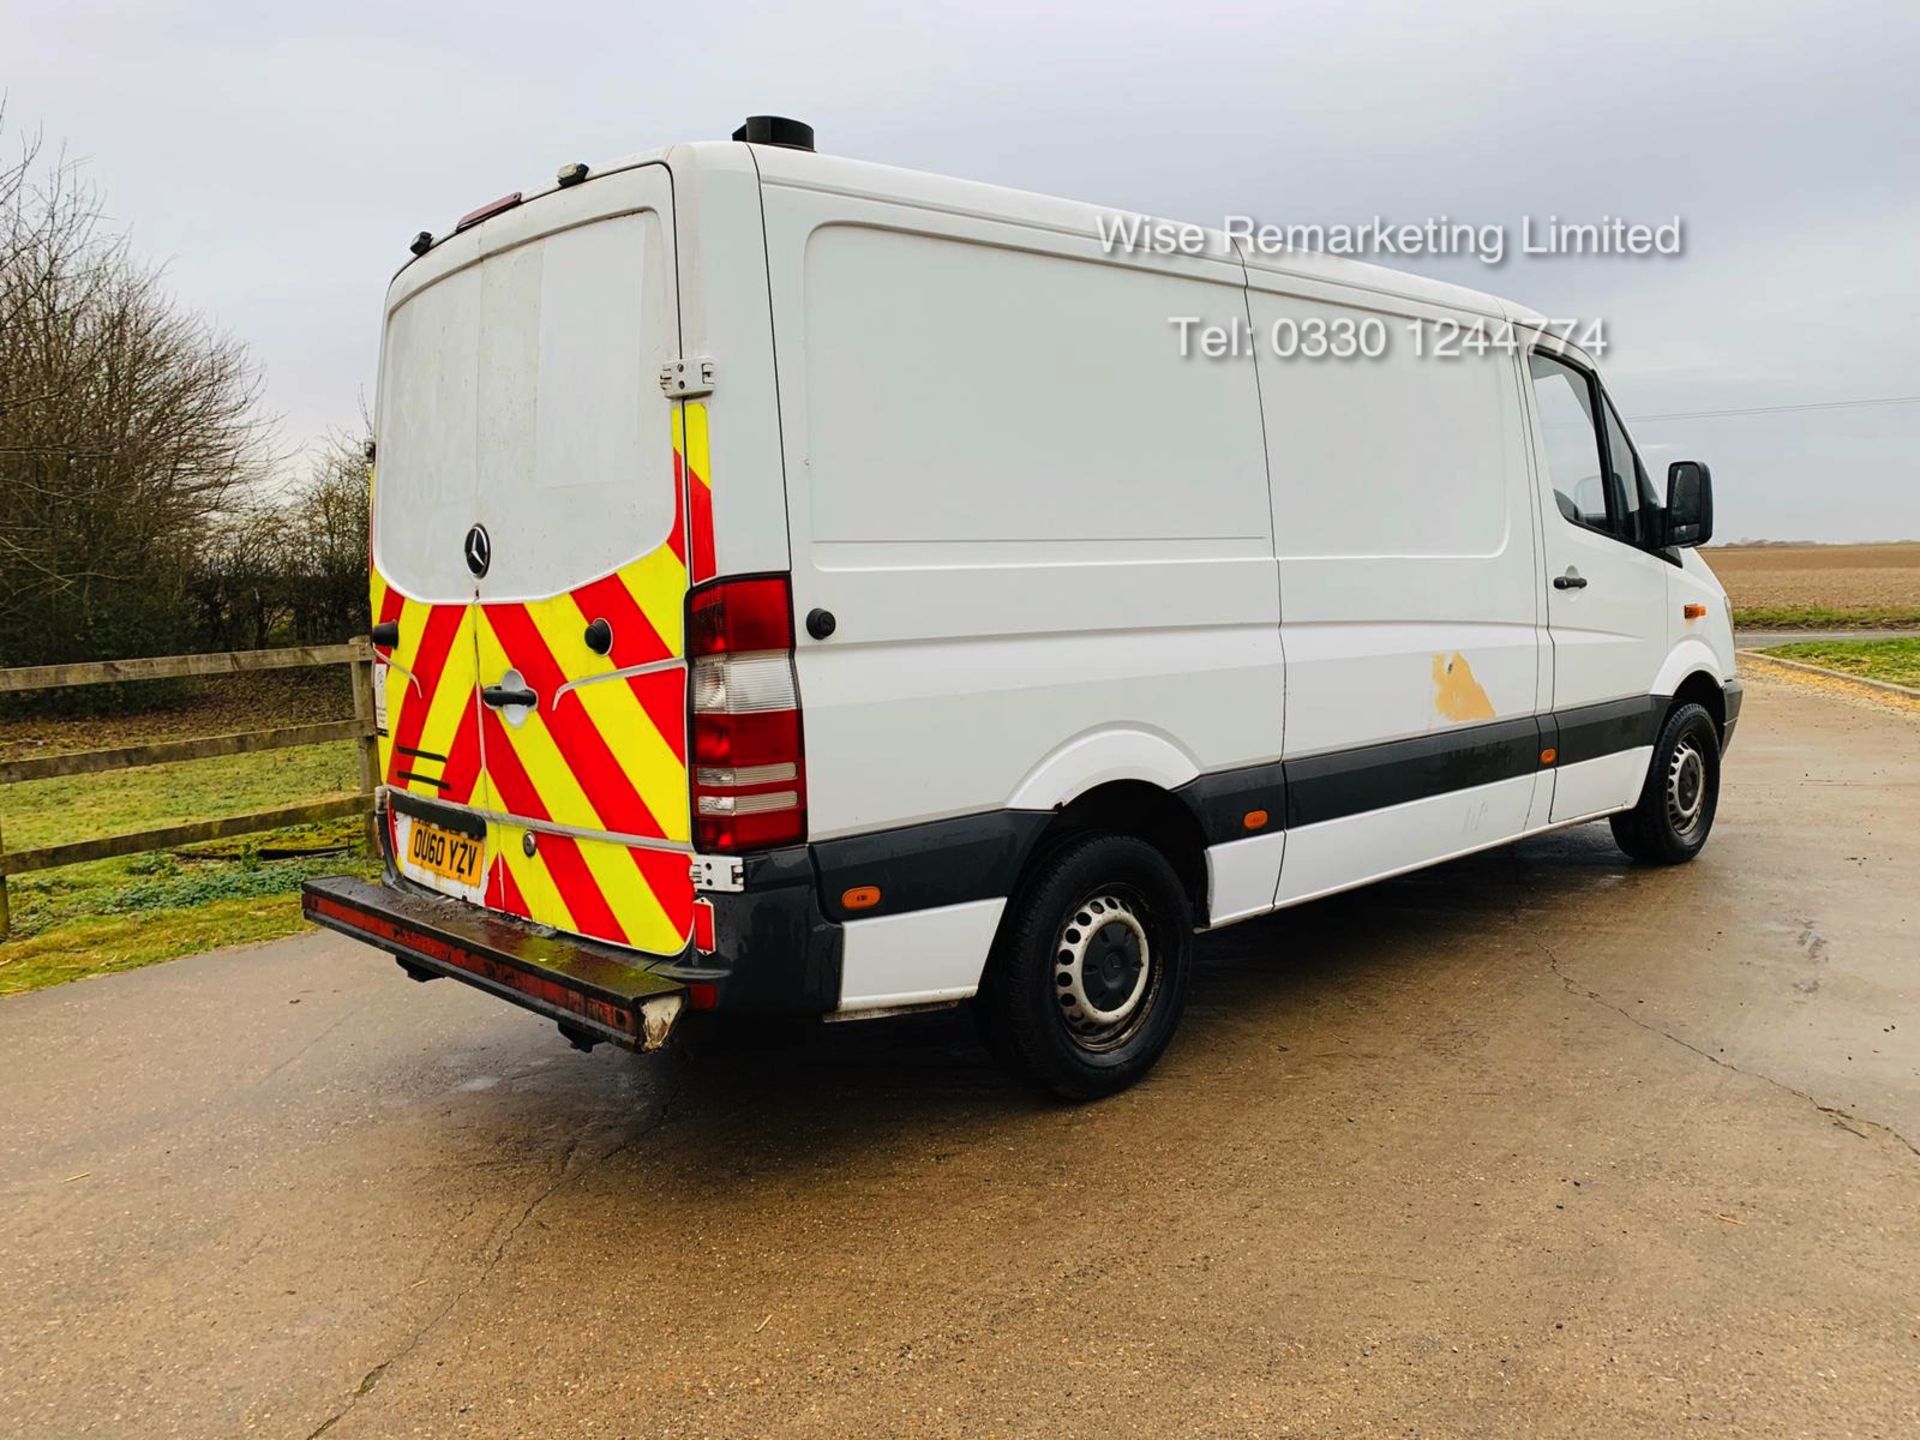 Reserve Met Mercedes Sprinter 313 CDI 2.1 TD *Automatic Triptronic Gearbox* - 2011 Model - Ply Lined - Image 7 of 15